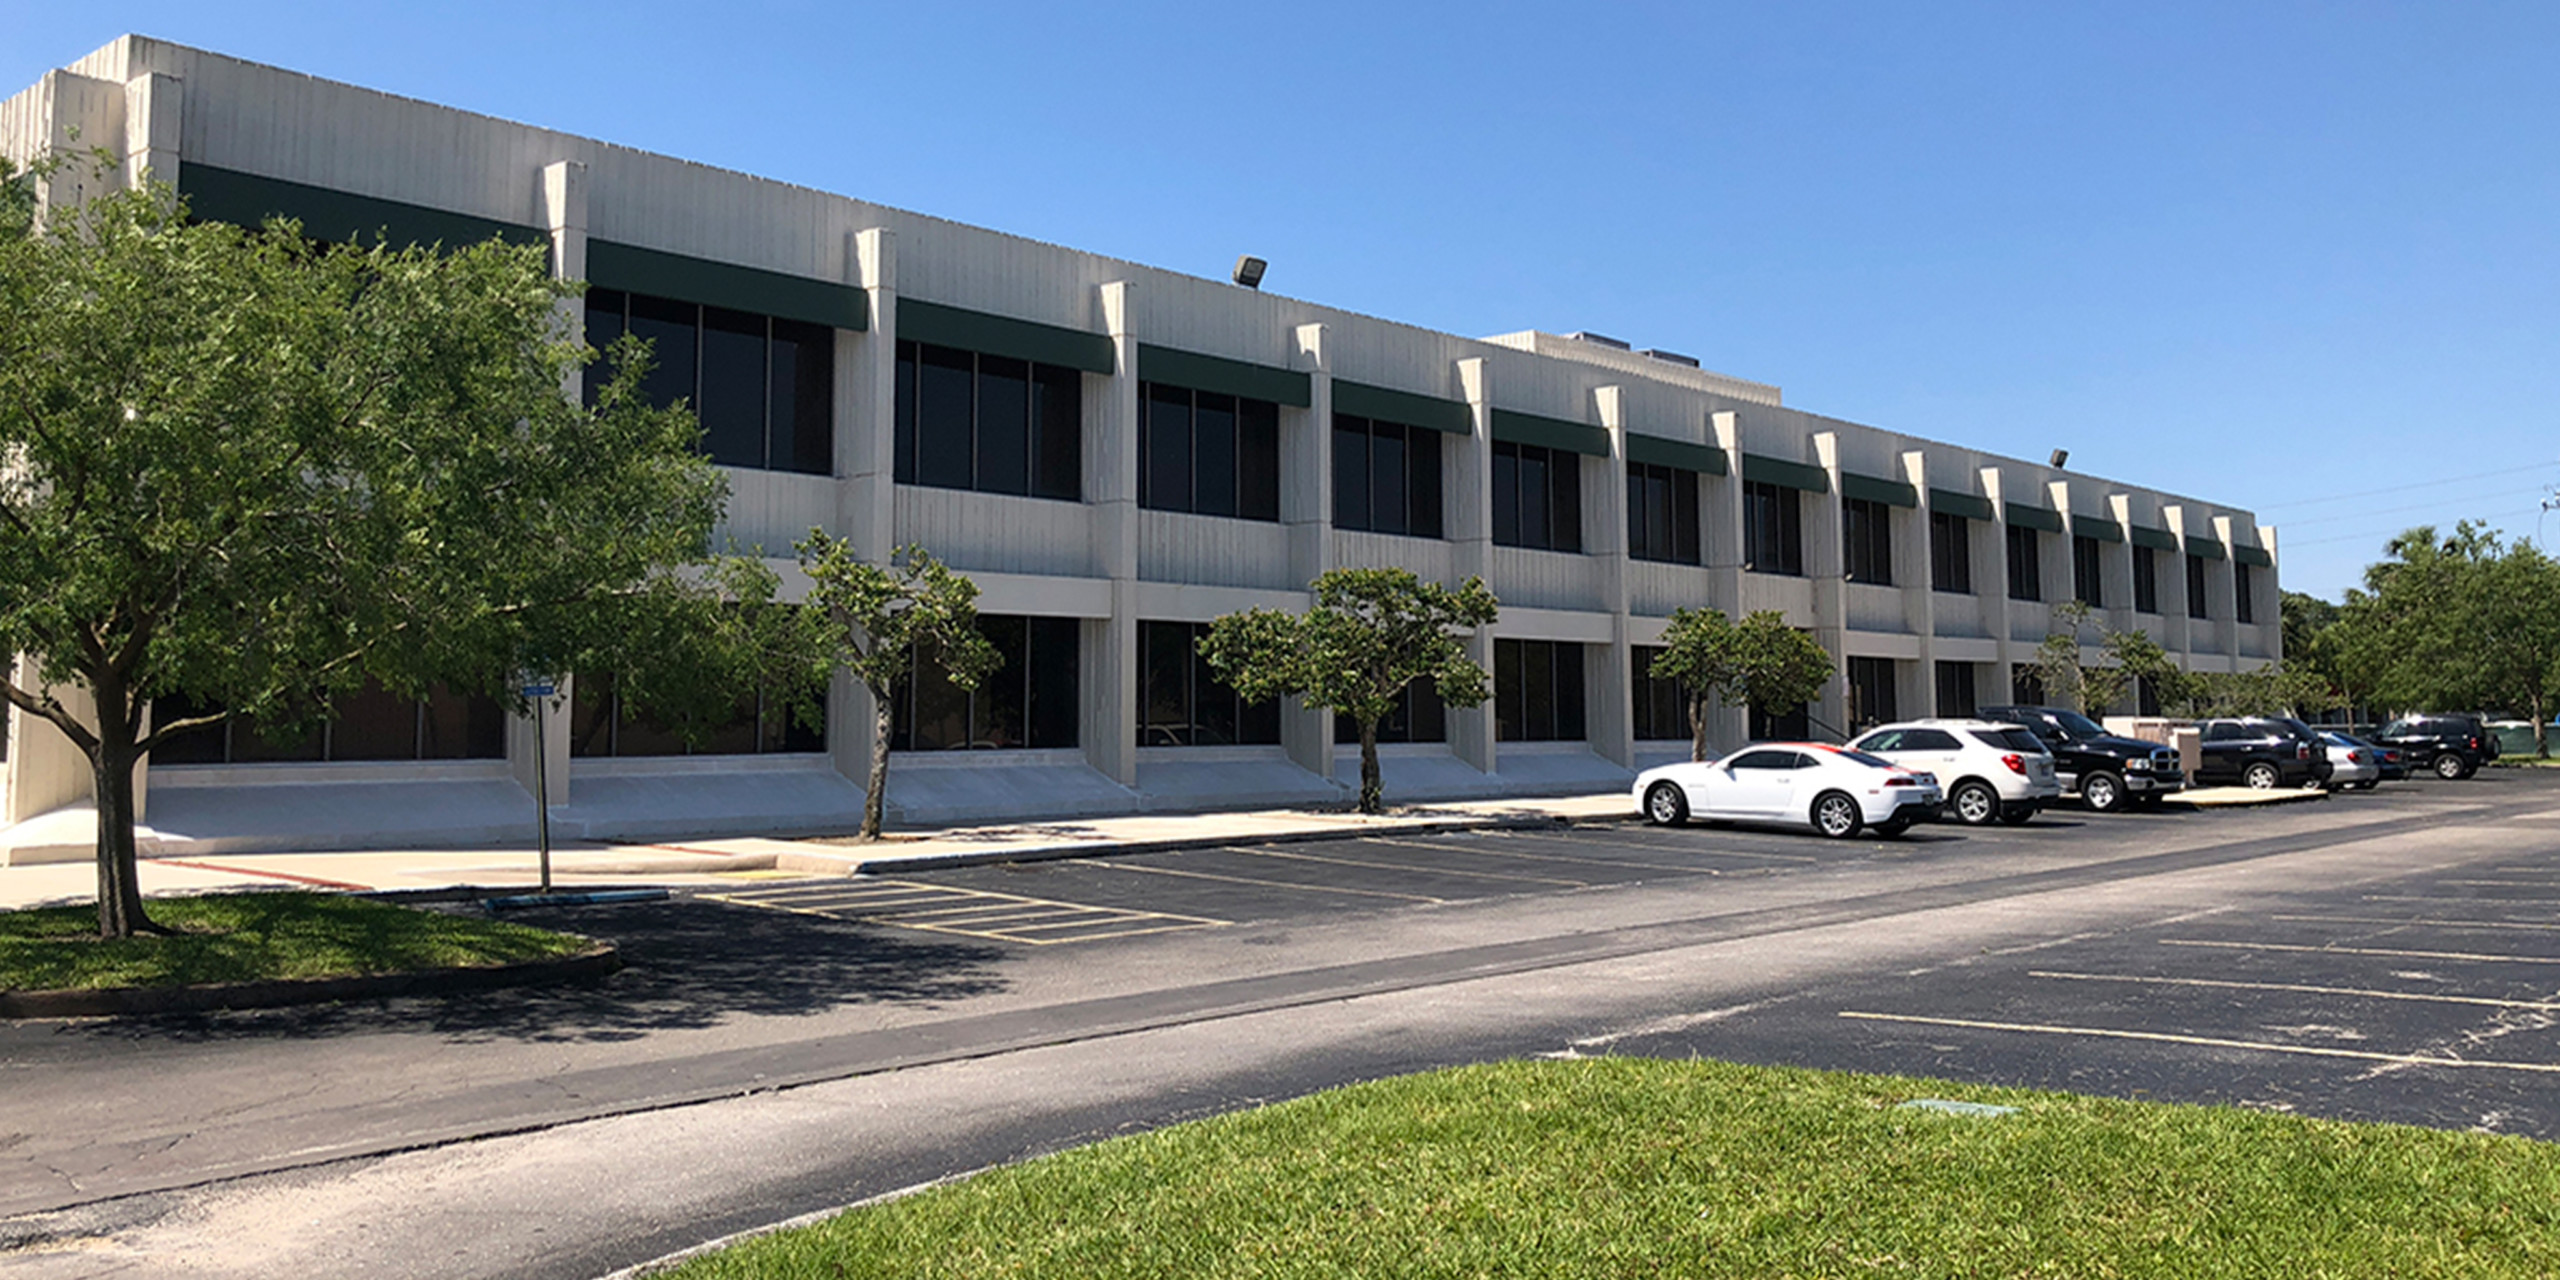 101 Century 21 Drive is a two-story, 28,208 square foot office building. The property sold for $1,230,000 on September 16, 2020.